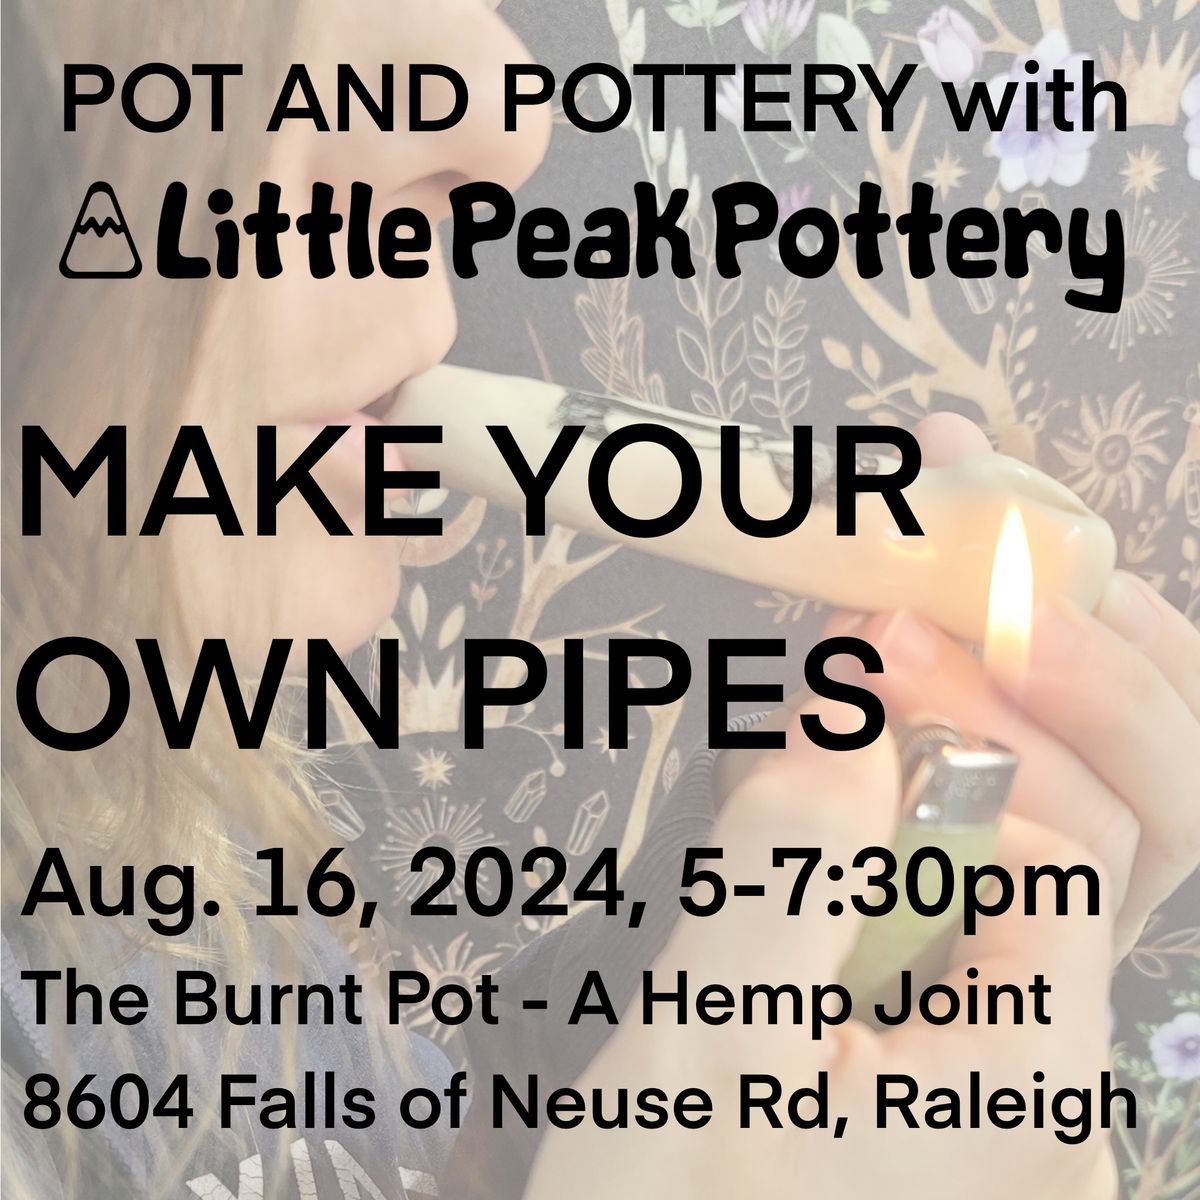 Pot and Pottery with Little Peak Pottery at The Burnt Pot